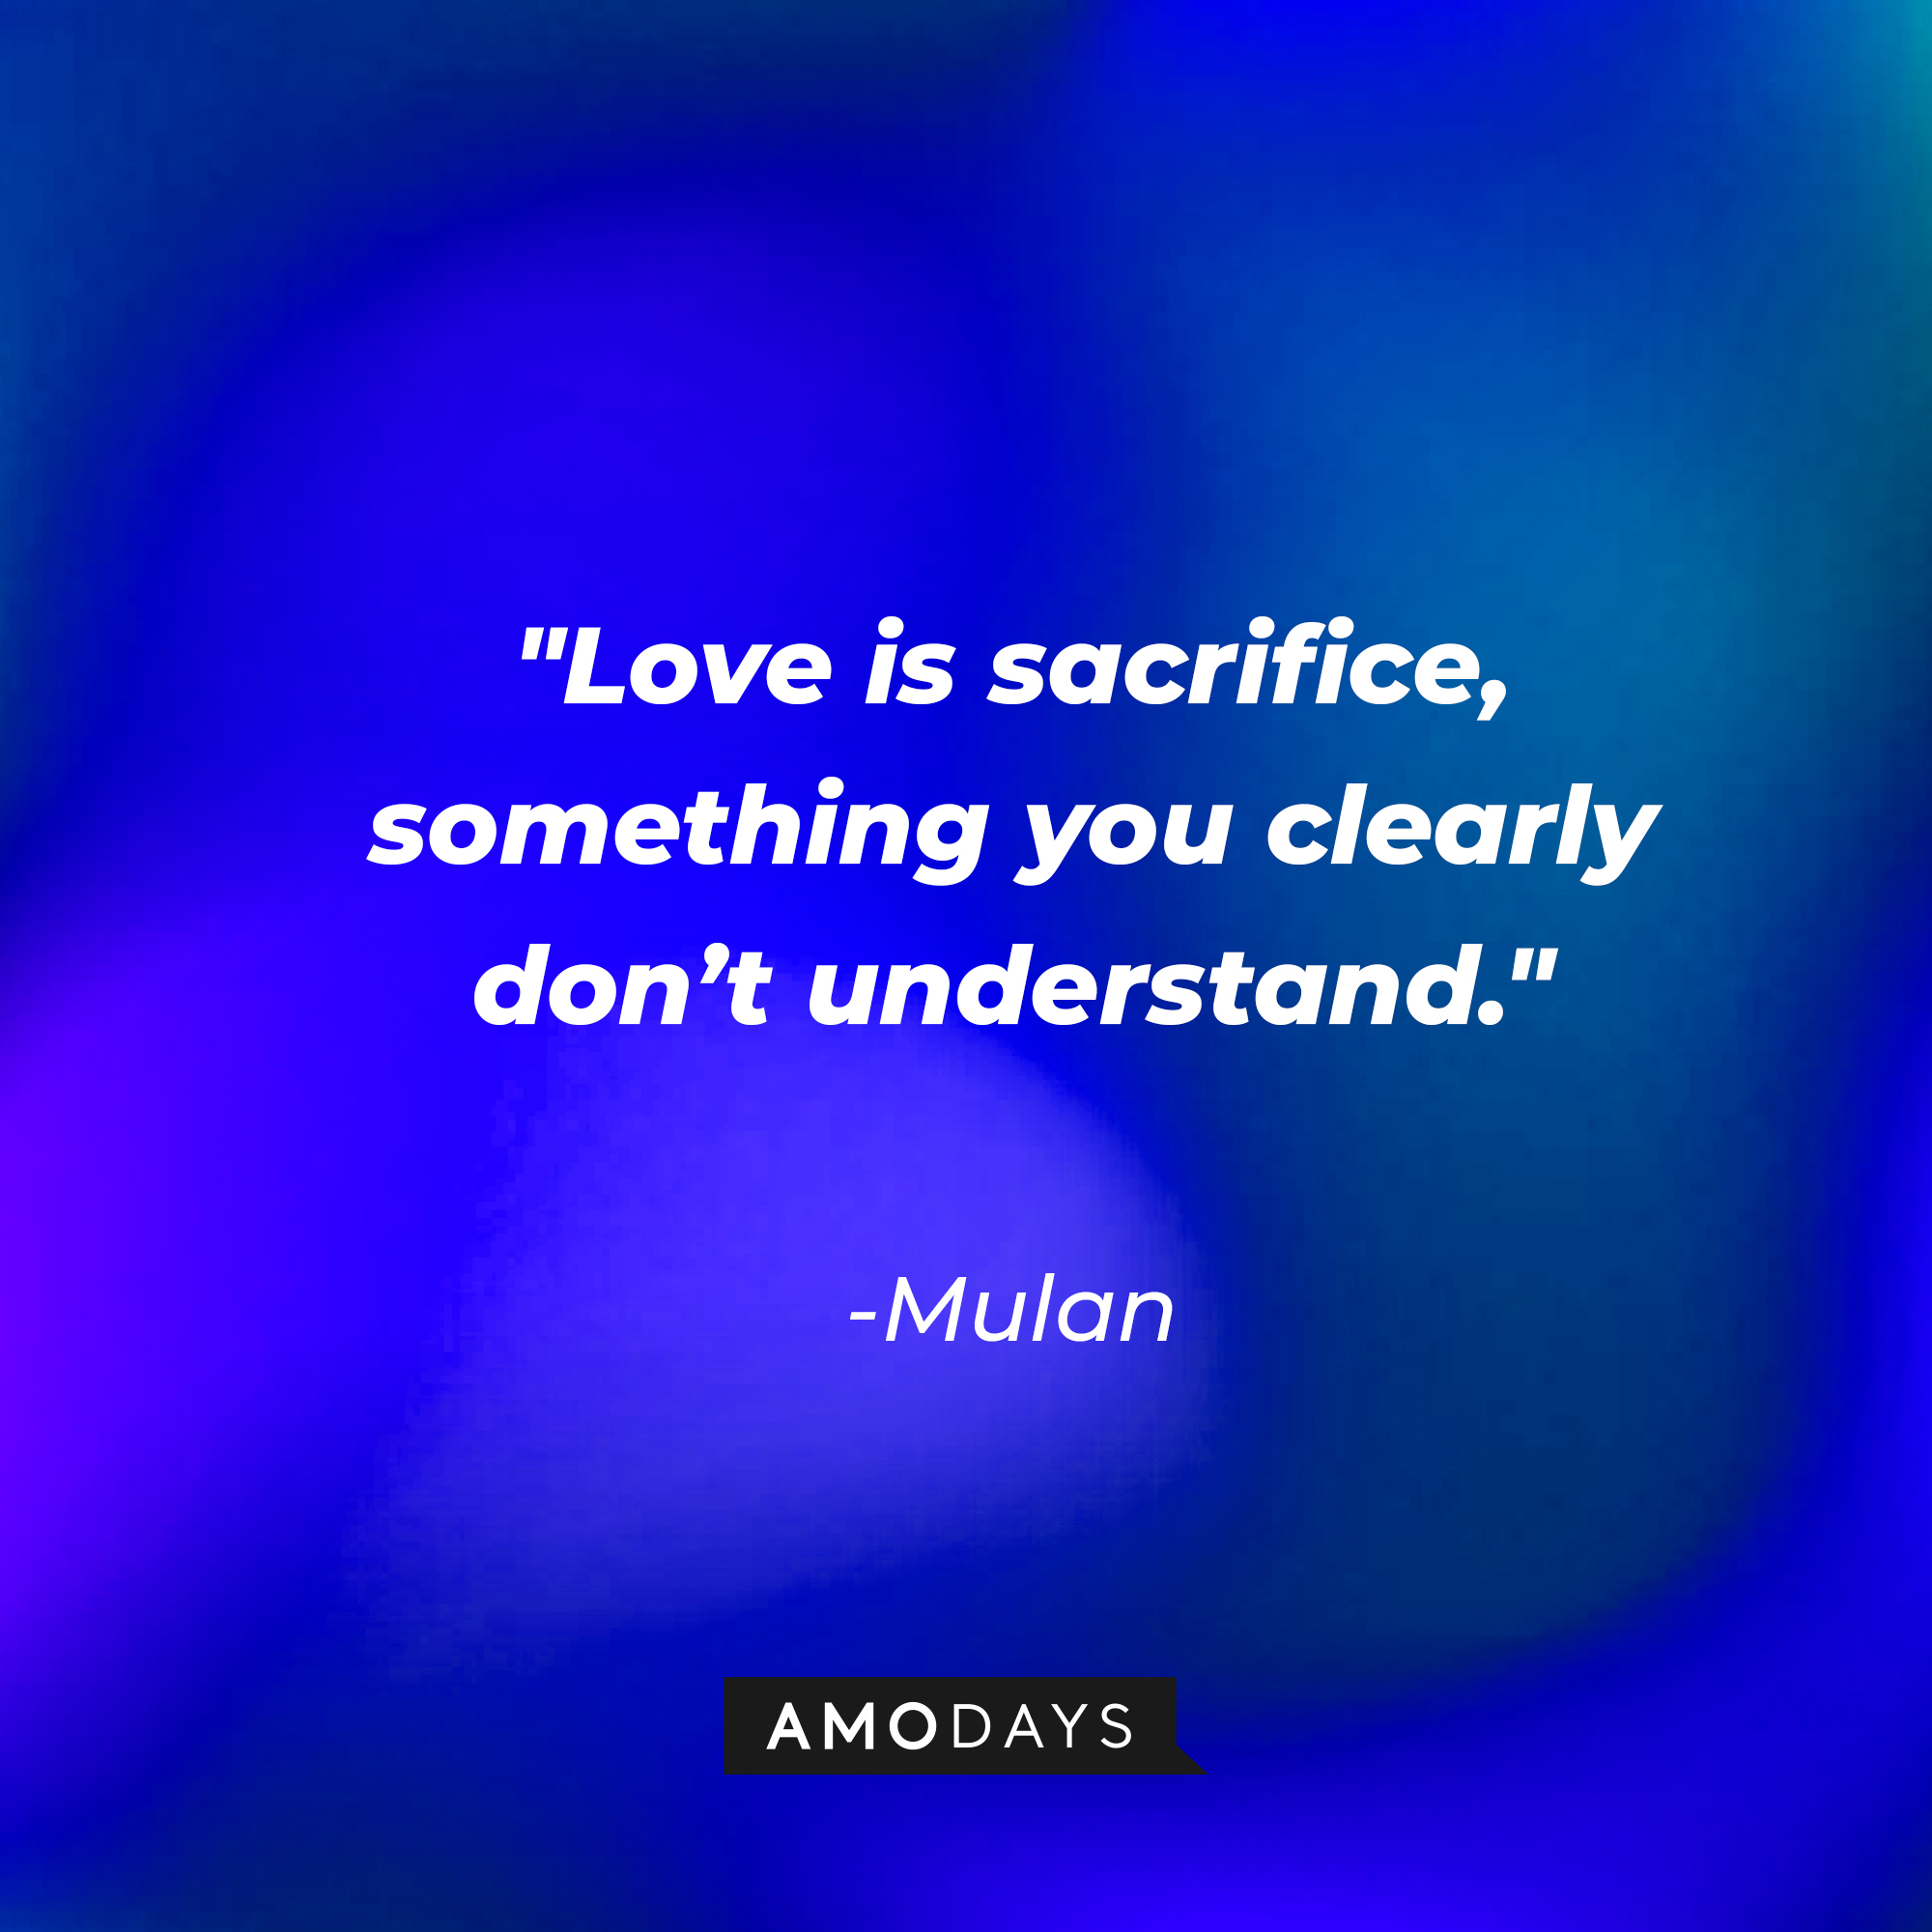 Mulan's quote: "'Love is sacrifice, something you clearly don't understand." | Source: Amodays